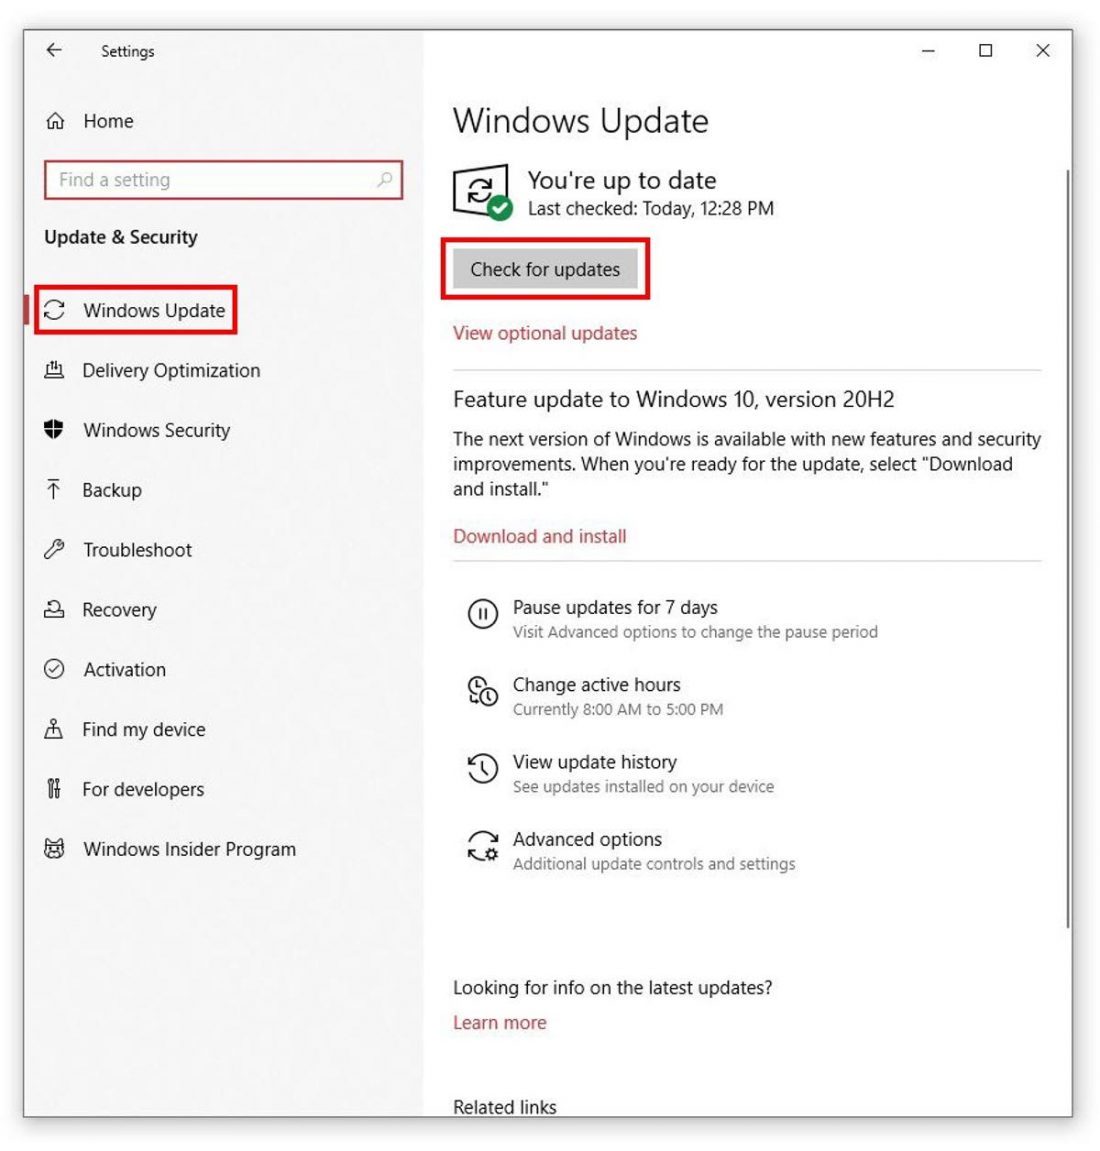 Update & Security window with Windows Update and Check for updates highlighted.